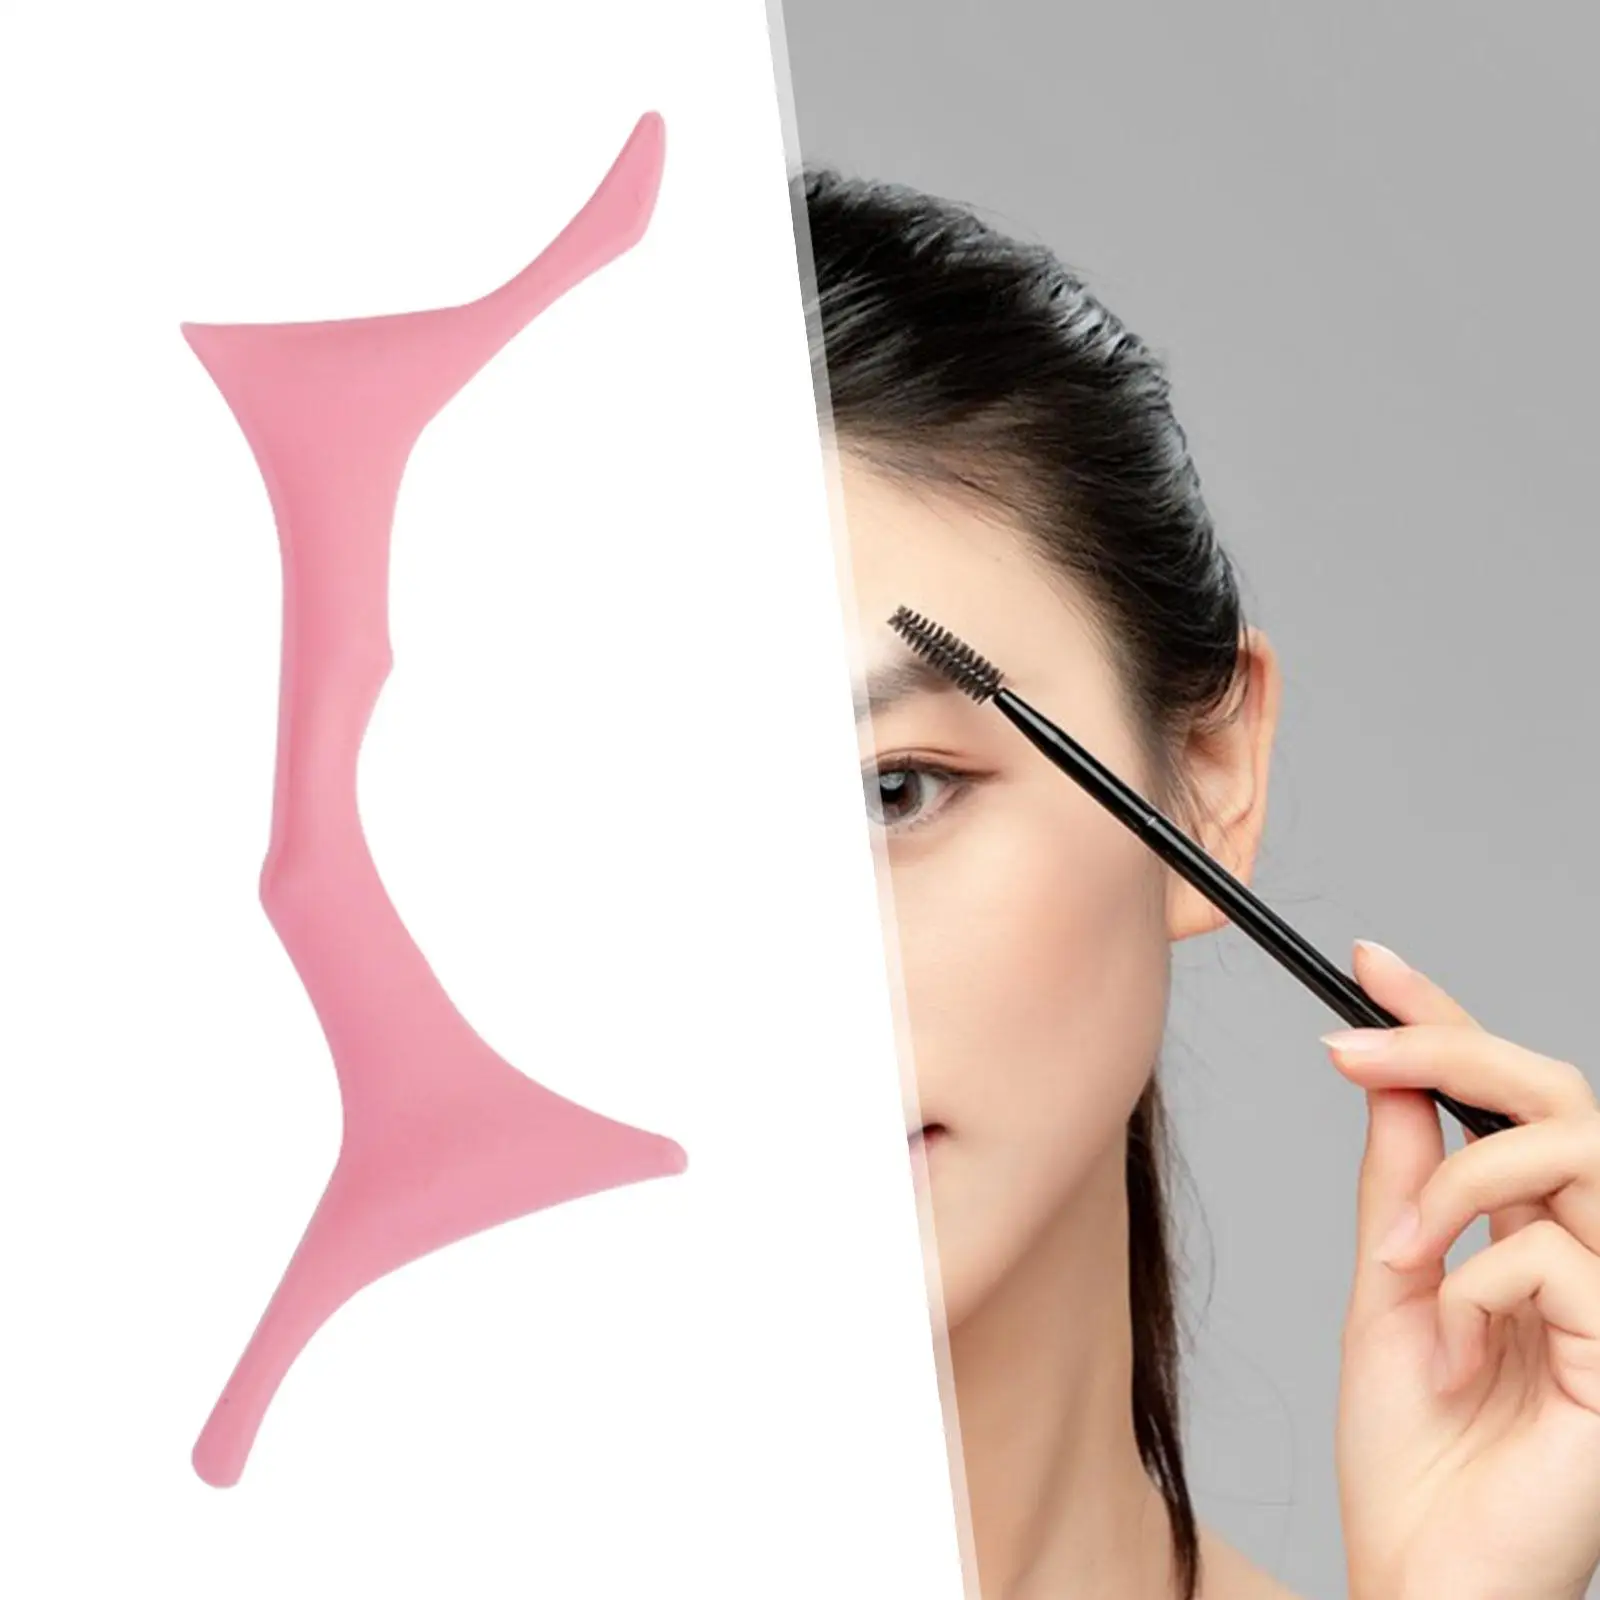 Silicone Eyebrow Shaping Tool Eyeliner Stencil Lightweight Simple and Practical Eyeliner Guide Tool Multipurpose for Beginners